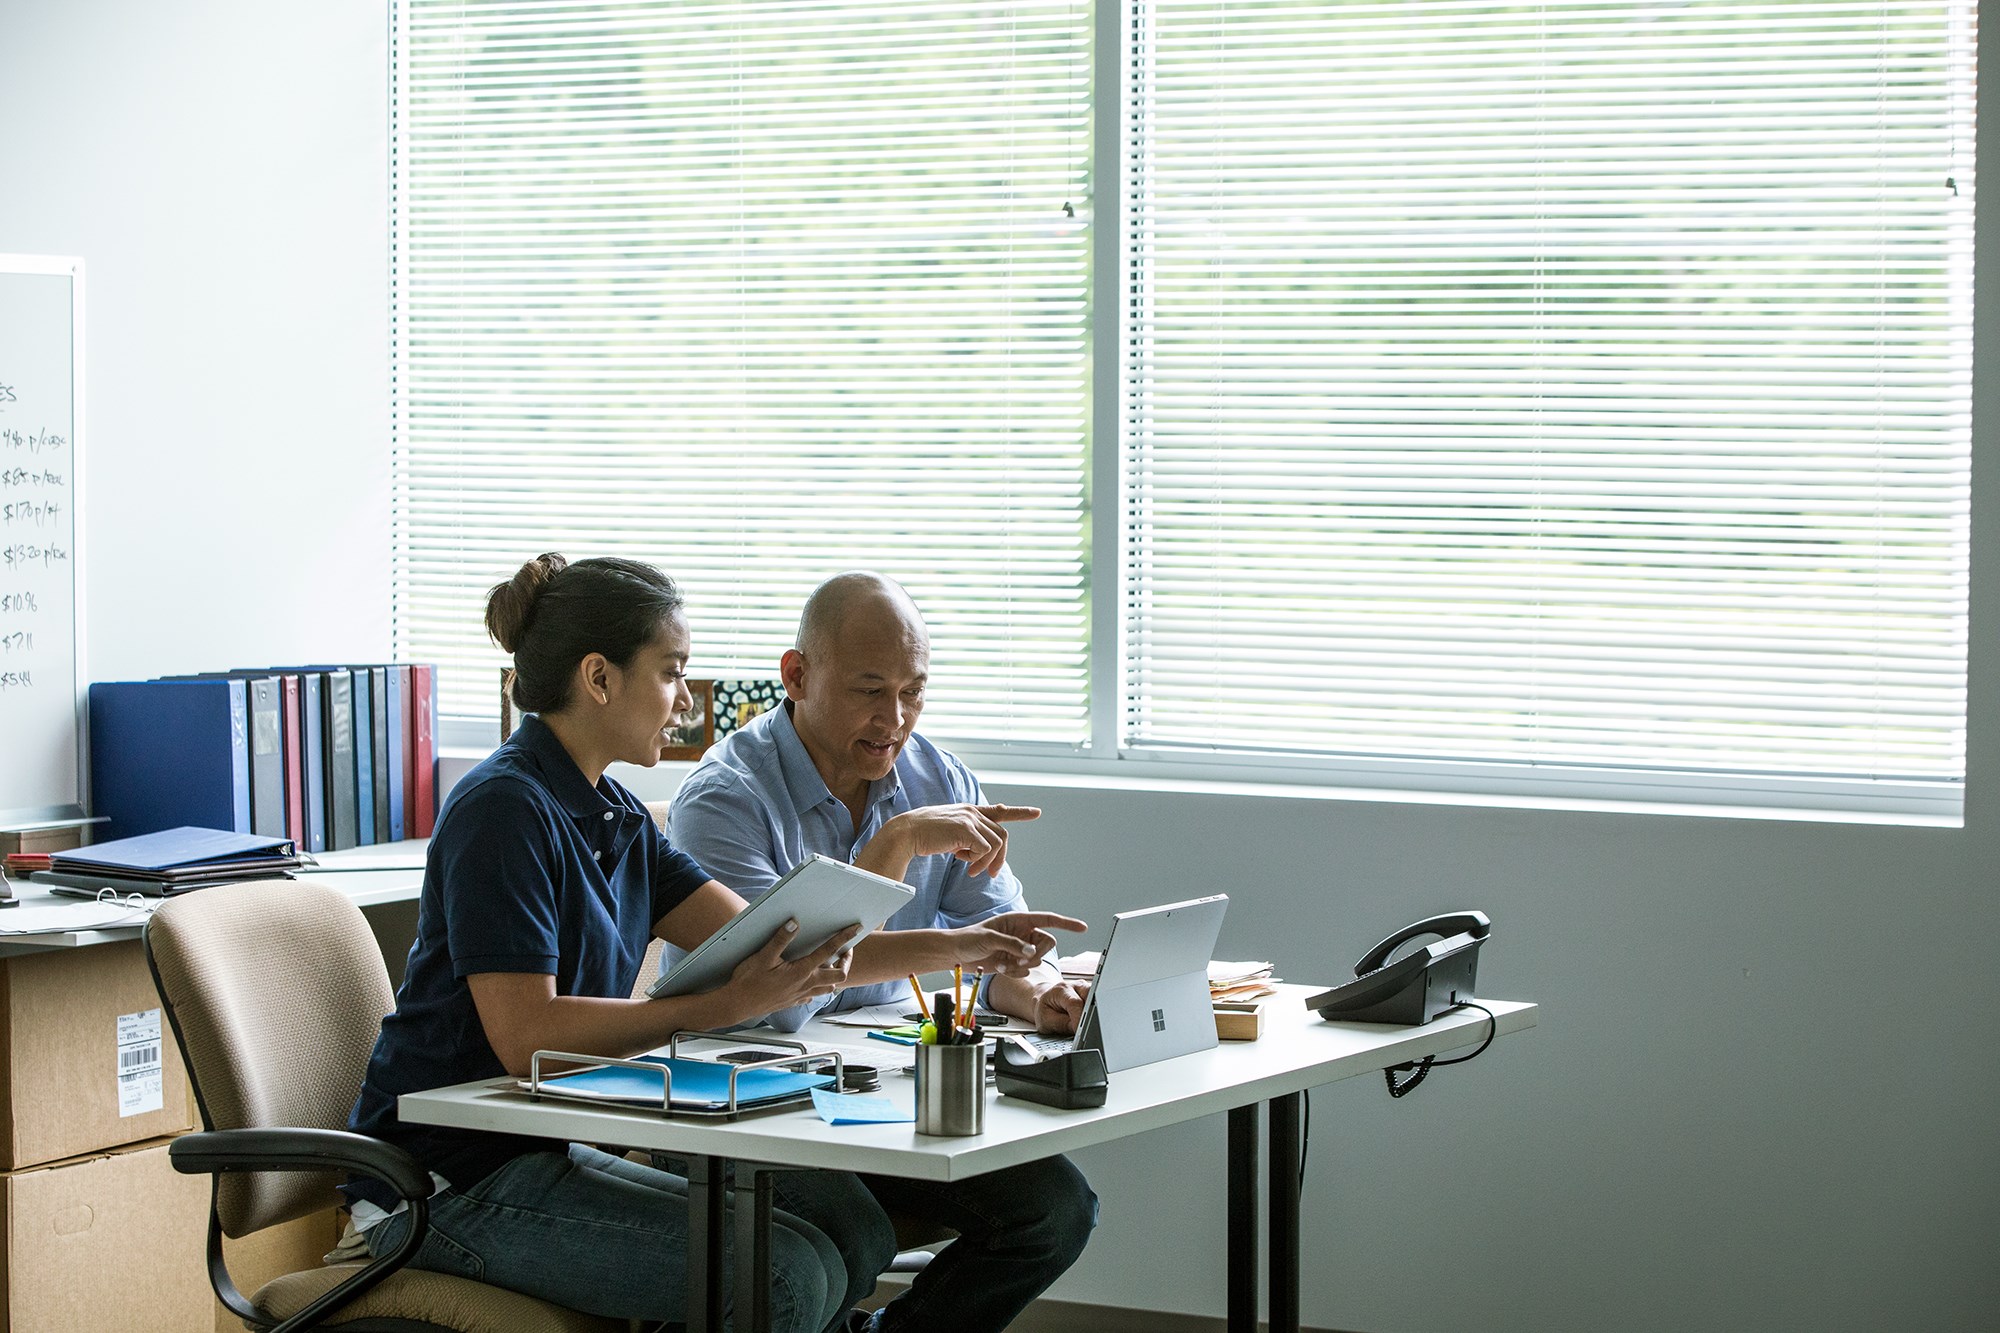 Two people in an office with two Surface devices